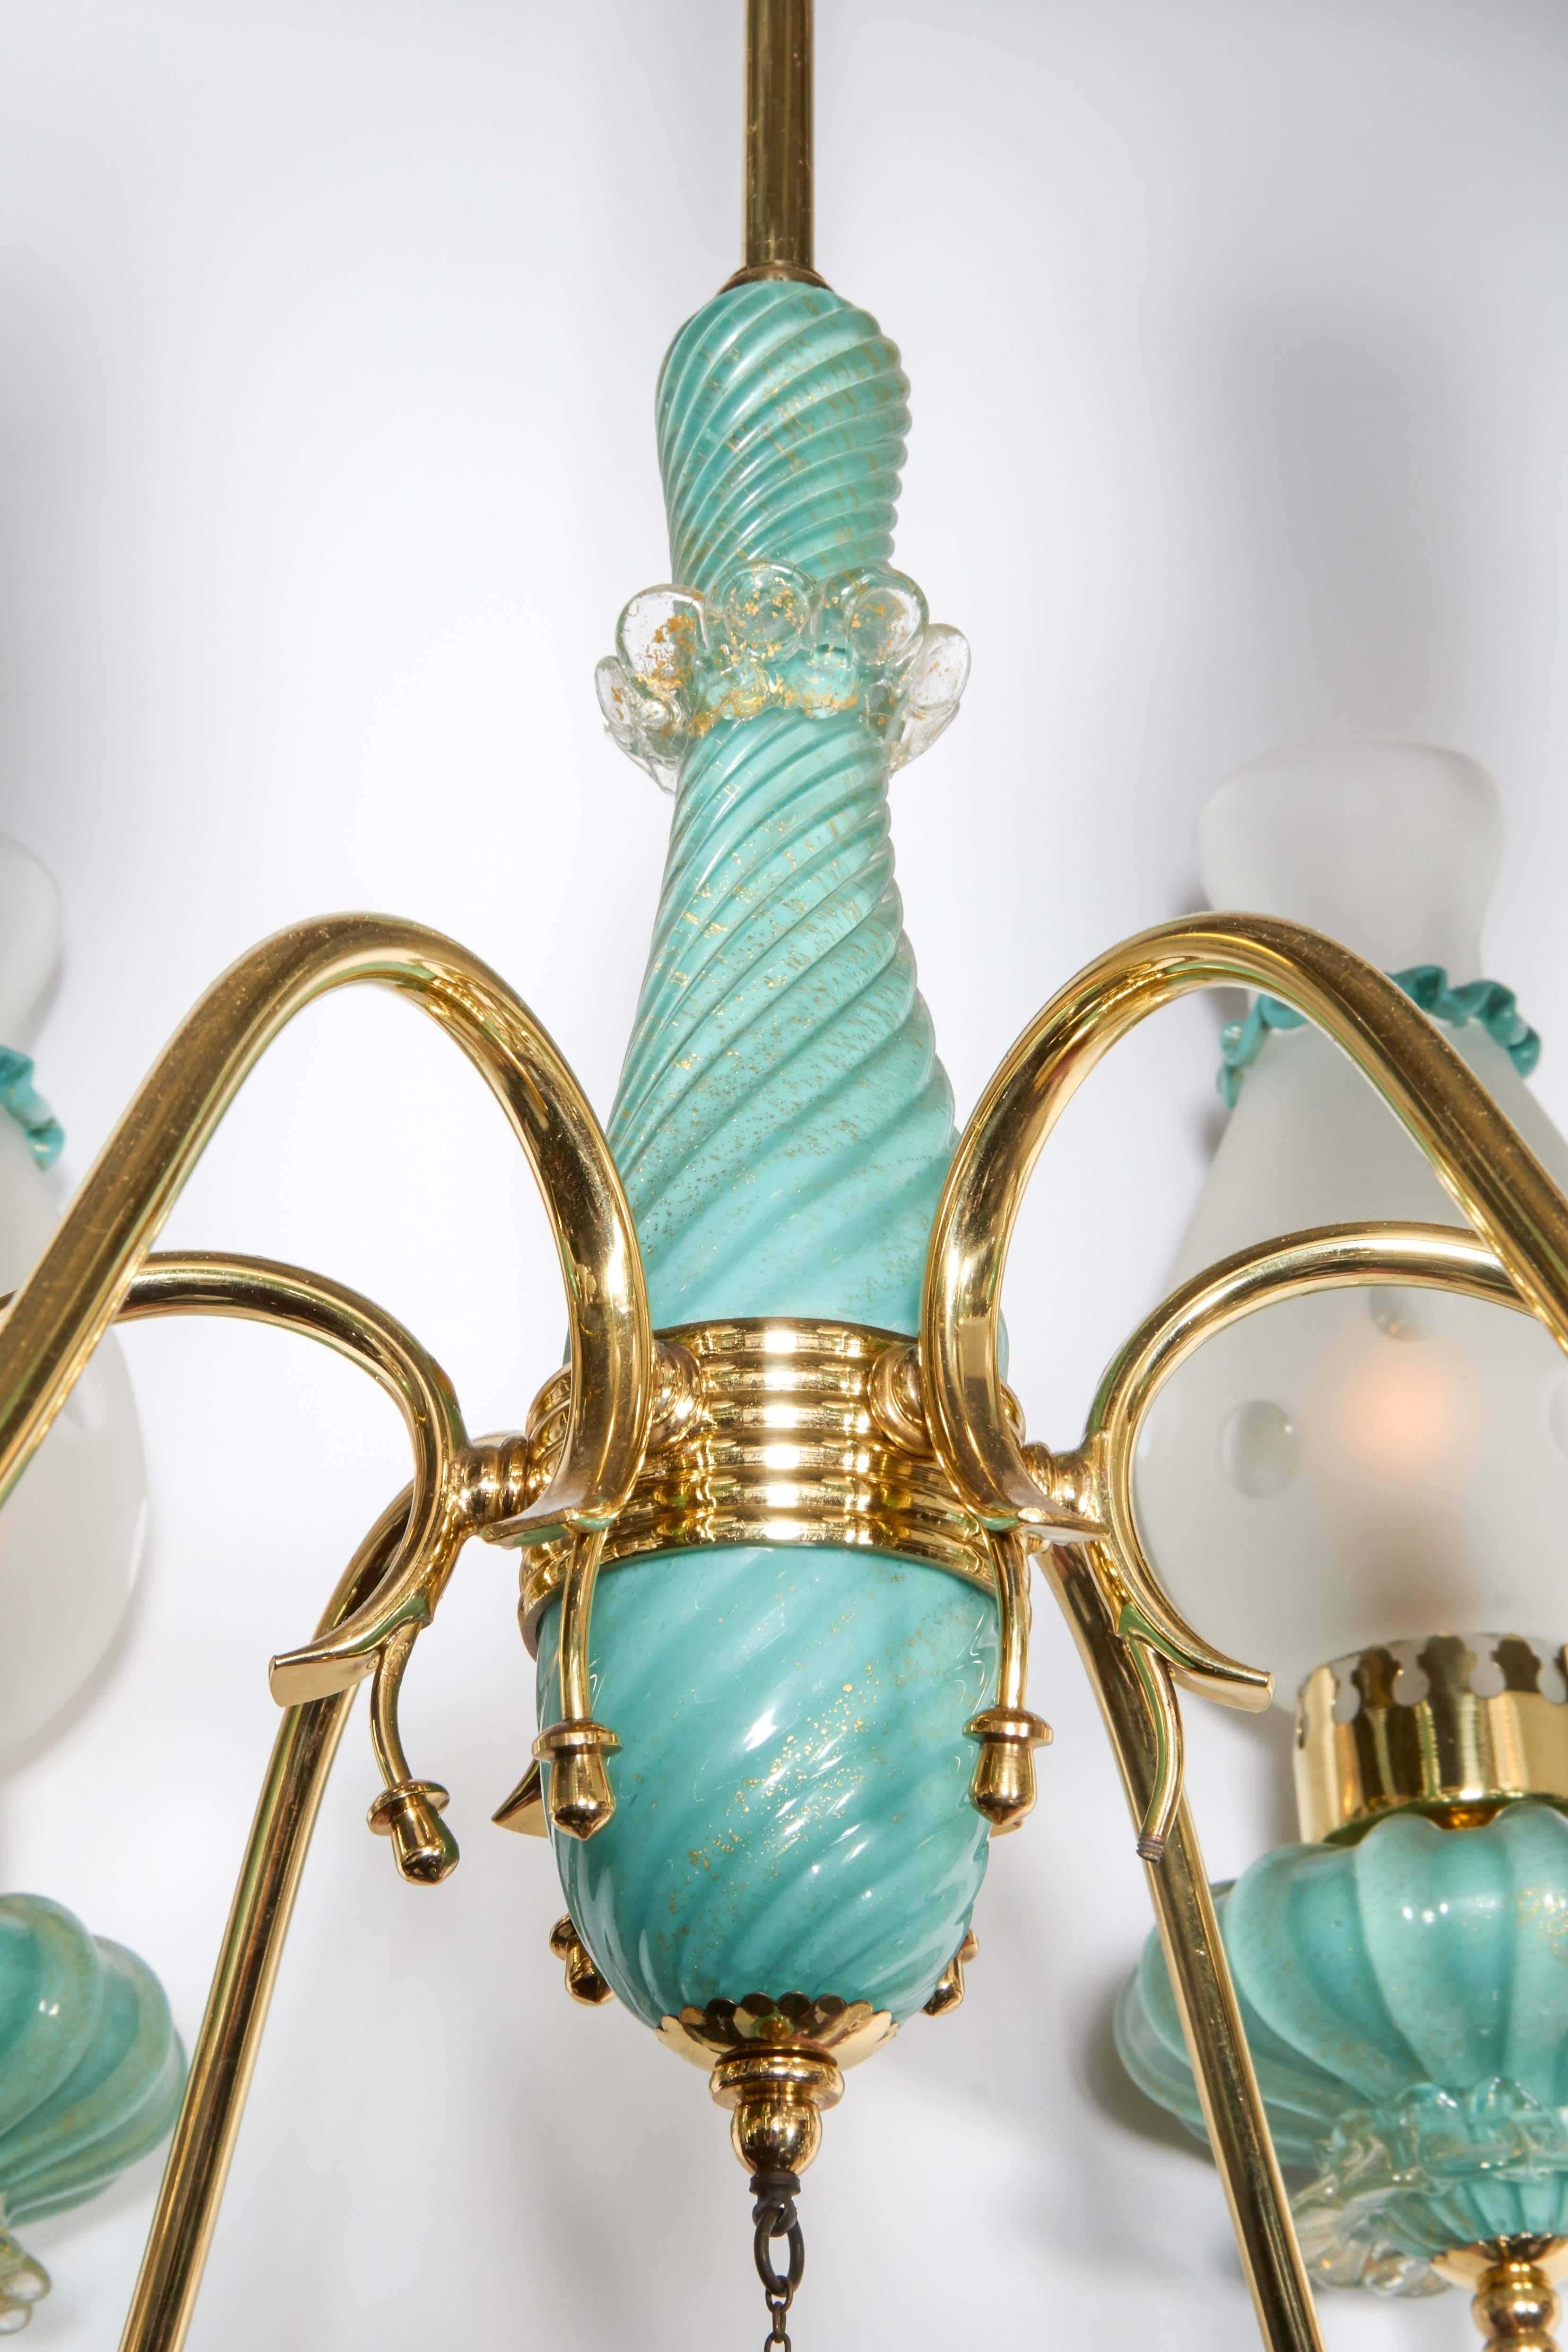 Mid-20th Century 1950s Italian Six-Arm Chandelier Glass Attributed to Seguso Vetri d'Arte For Sale